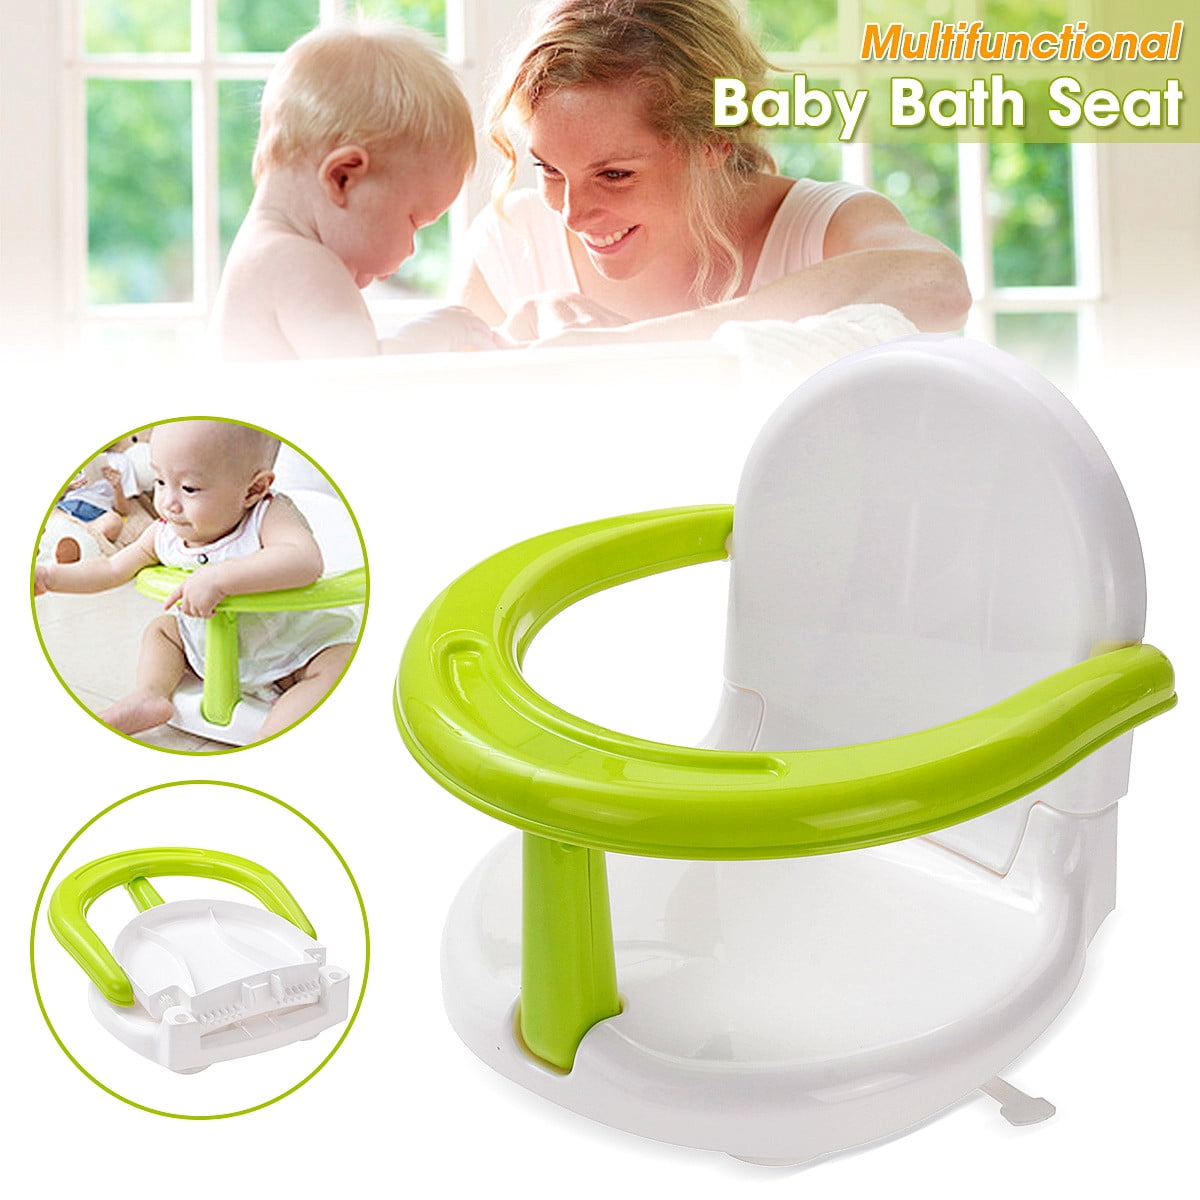 3 In 1 Foldable Infant Baby Bath Shower Chair Anti Skid Toddler Seat Safety Support Seat For Eating Bathing Sitting Up Walmart Canada